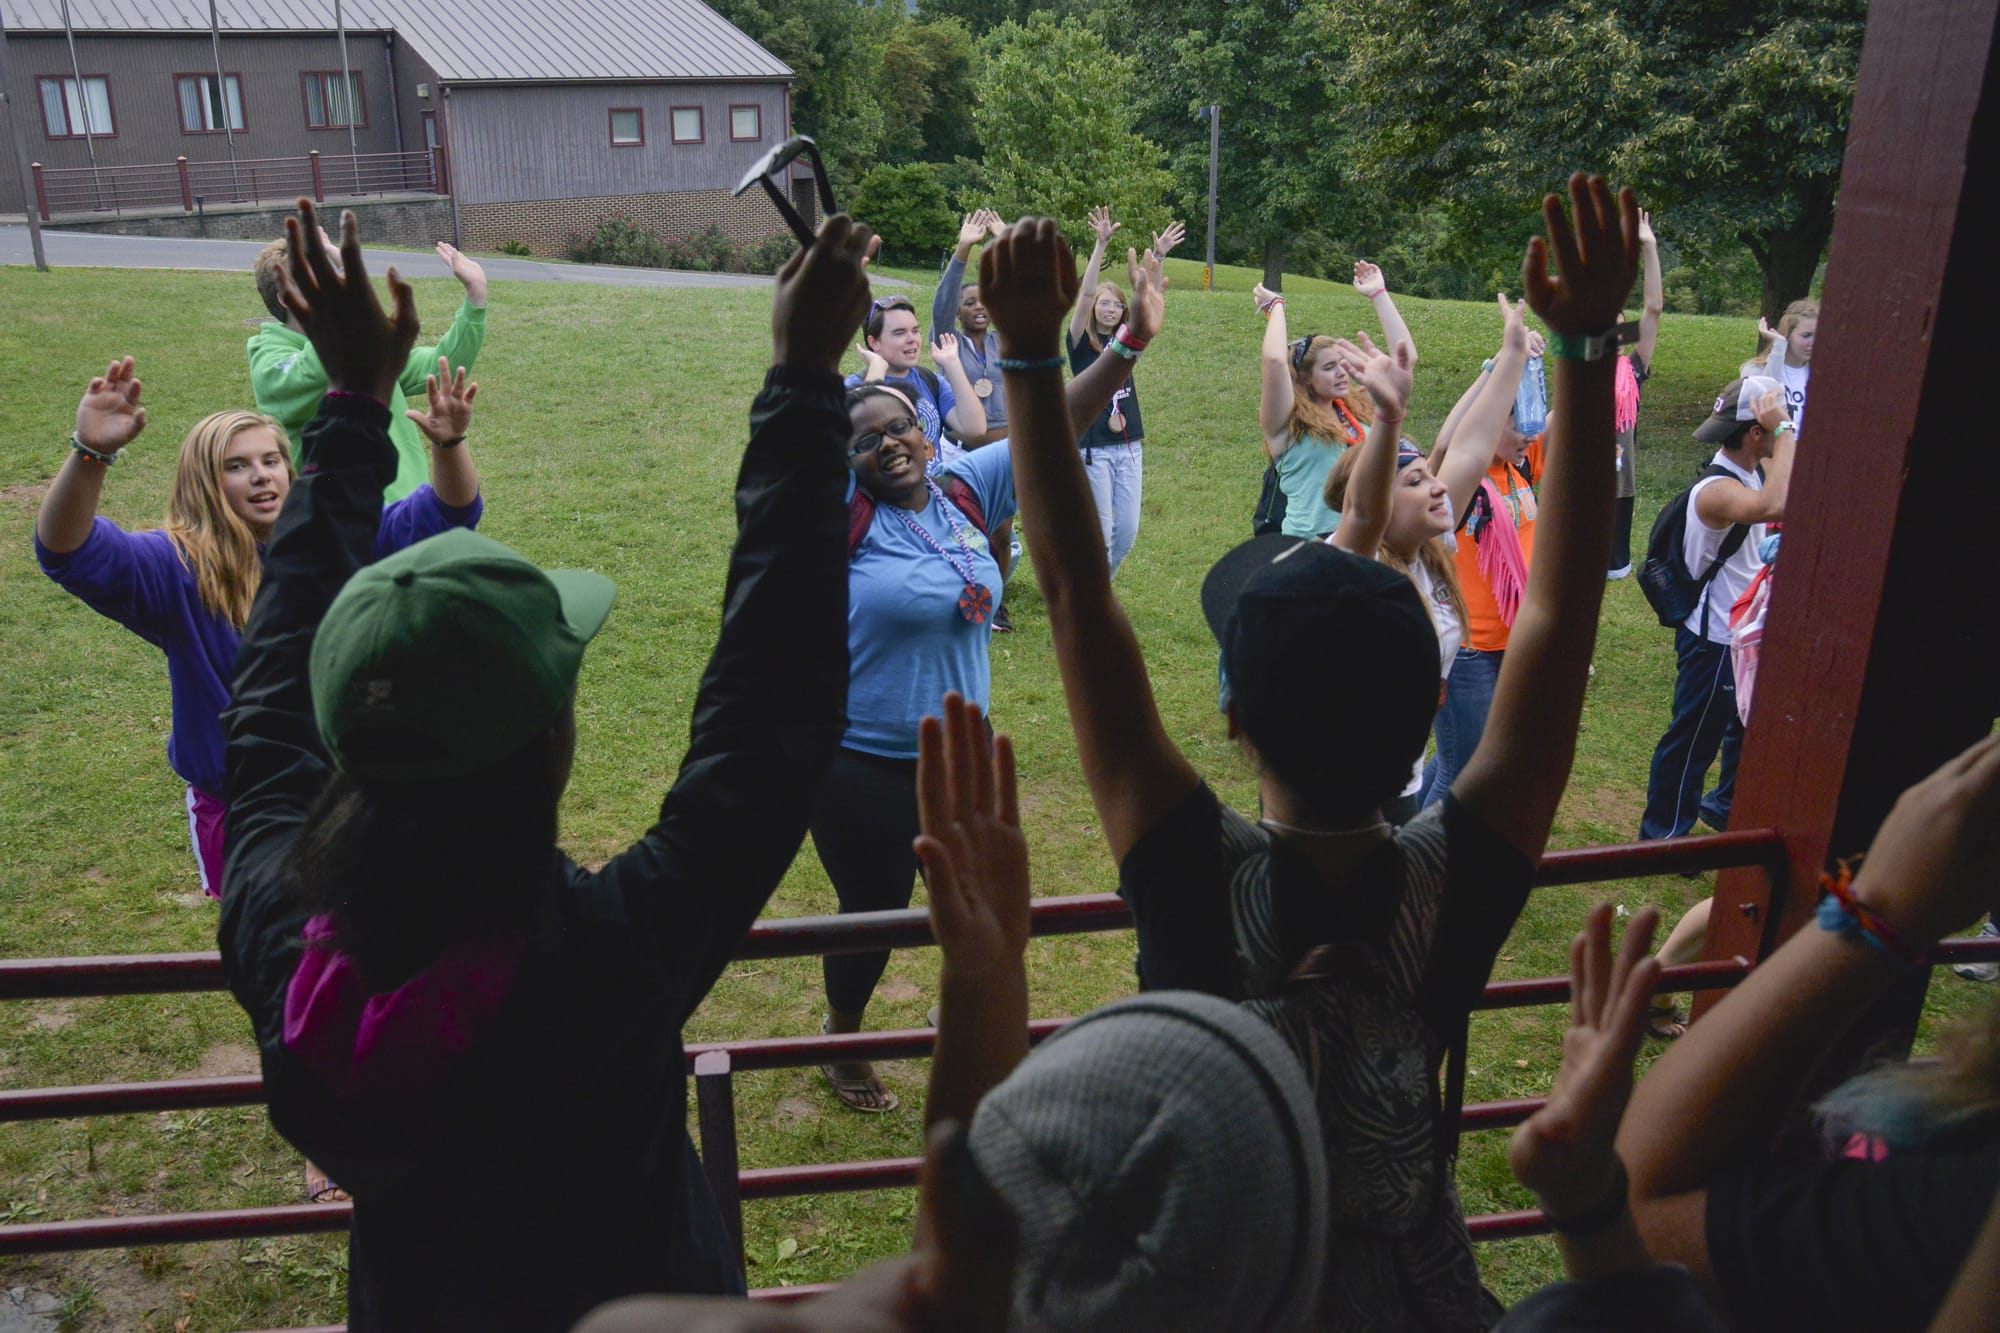 Counselors and staff members lead campers in a cheer at Camp Corral in Front Royal, Va. The free summer camp for children of military parents wounded, disabled or killed in combat holds 22 sessions in 16 states. Illustrates CAMPS-MILITARY (category a), by Karen Chen (C) 2014, The Washington Post. Moved Thursday, Aug. 14, 2014.